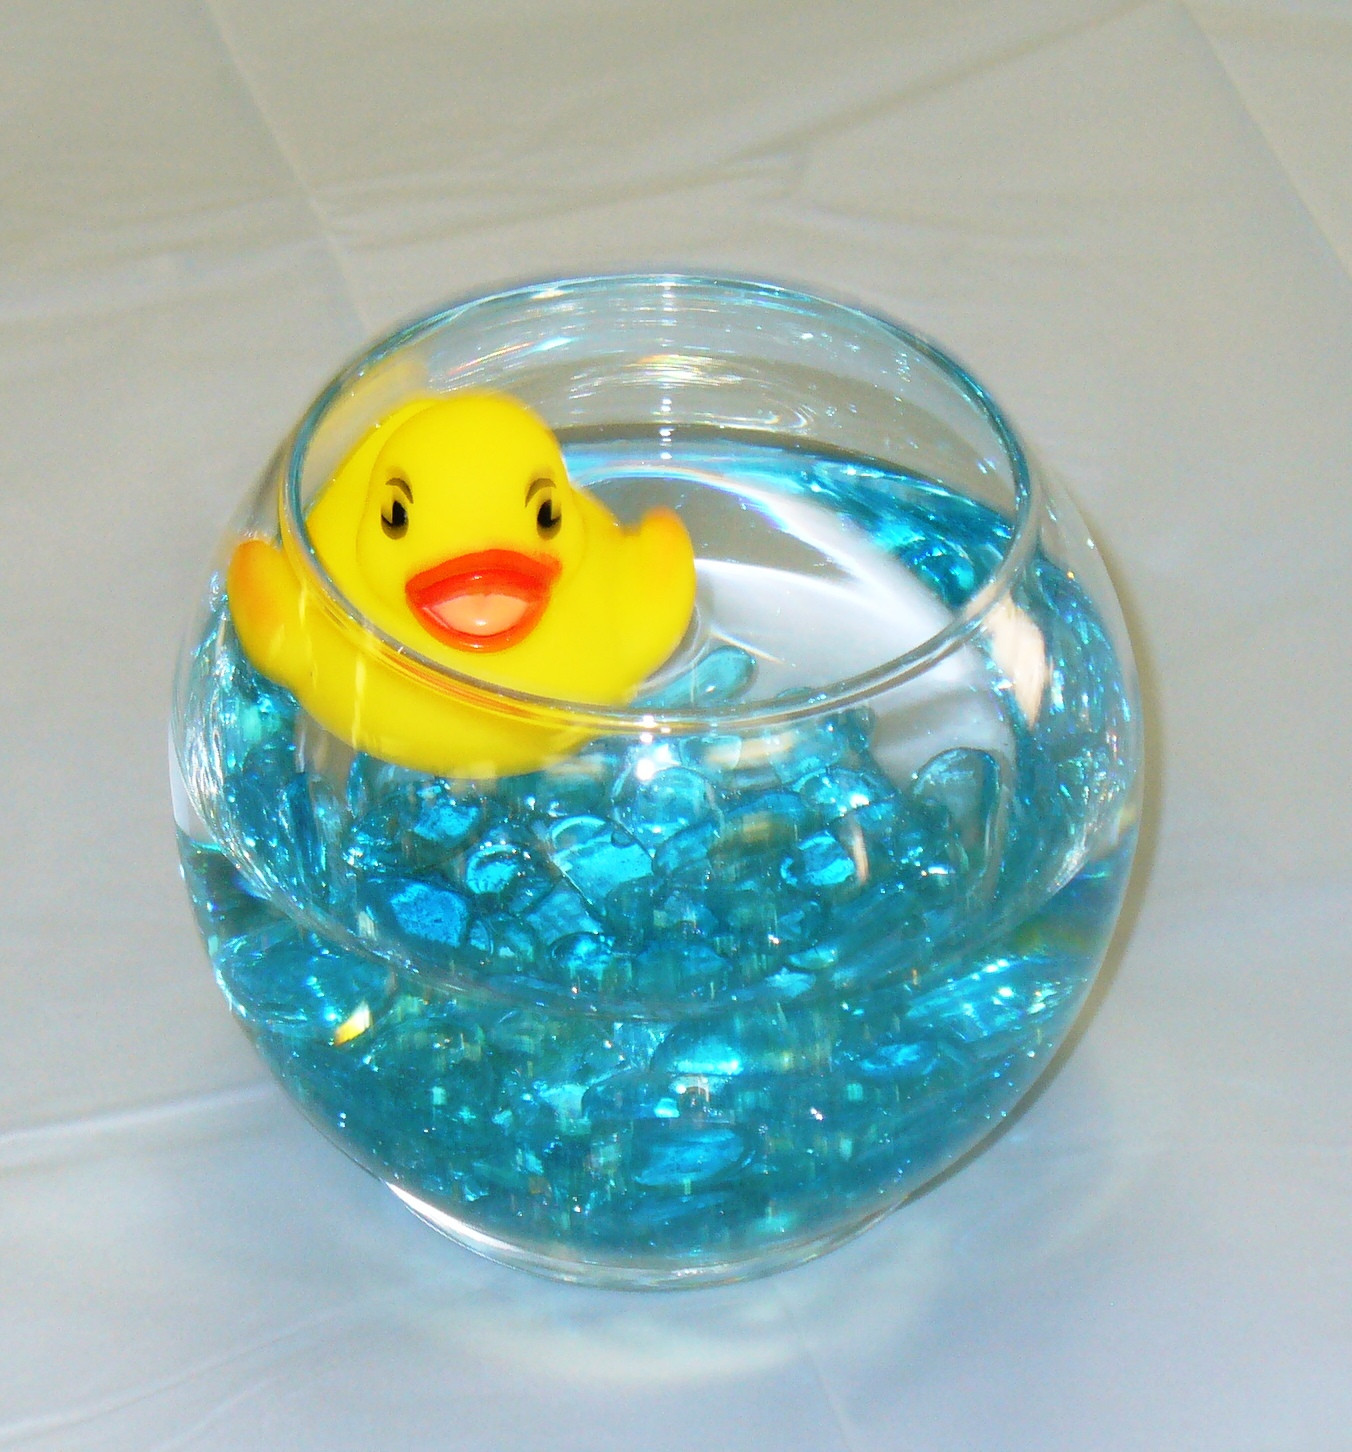 Party City Rubber Duck Baby Shower
 Tea Time Parties & Cupcakes RUBBER DUCK SHOWER GUEST